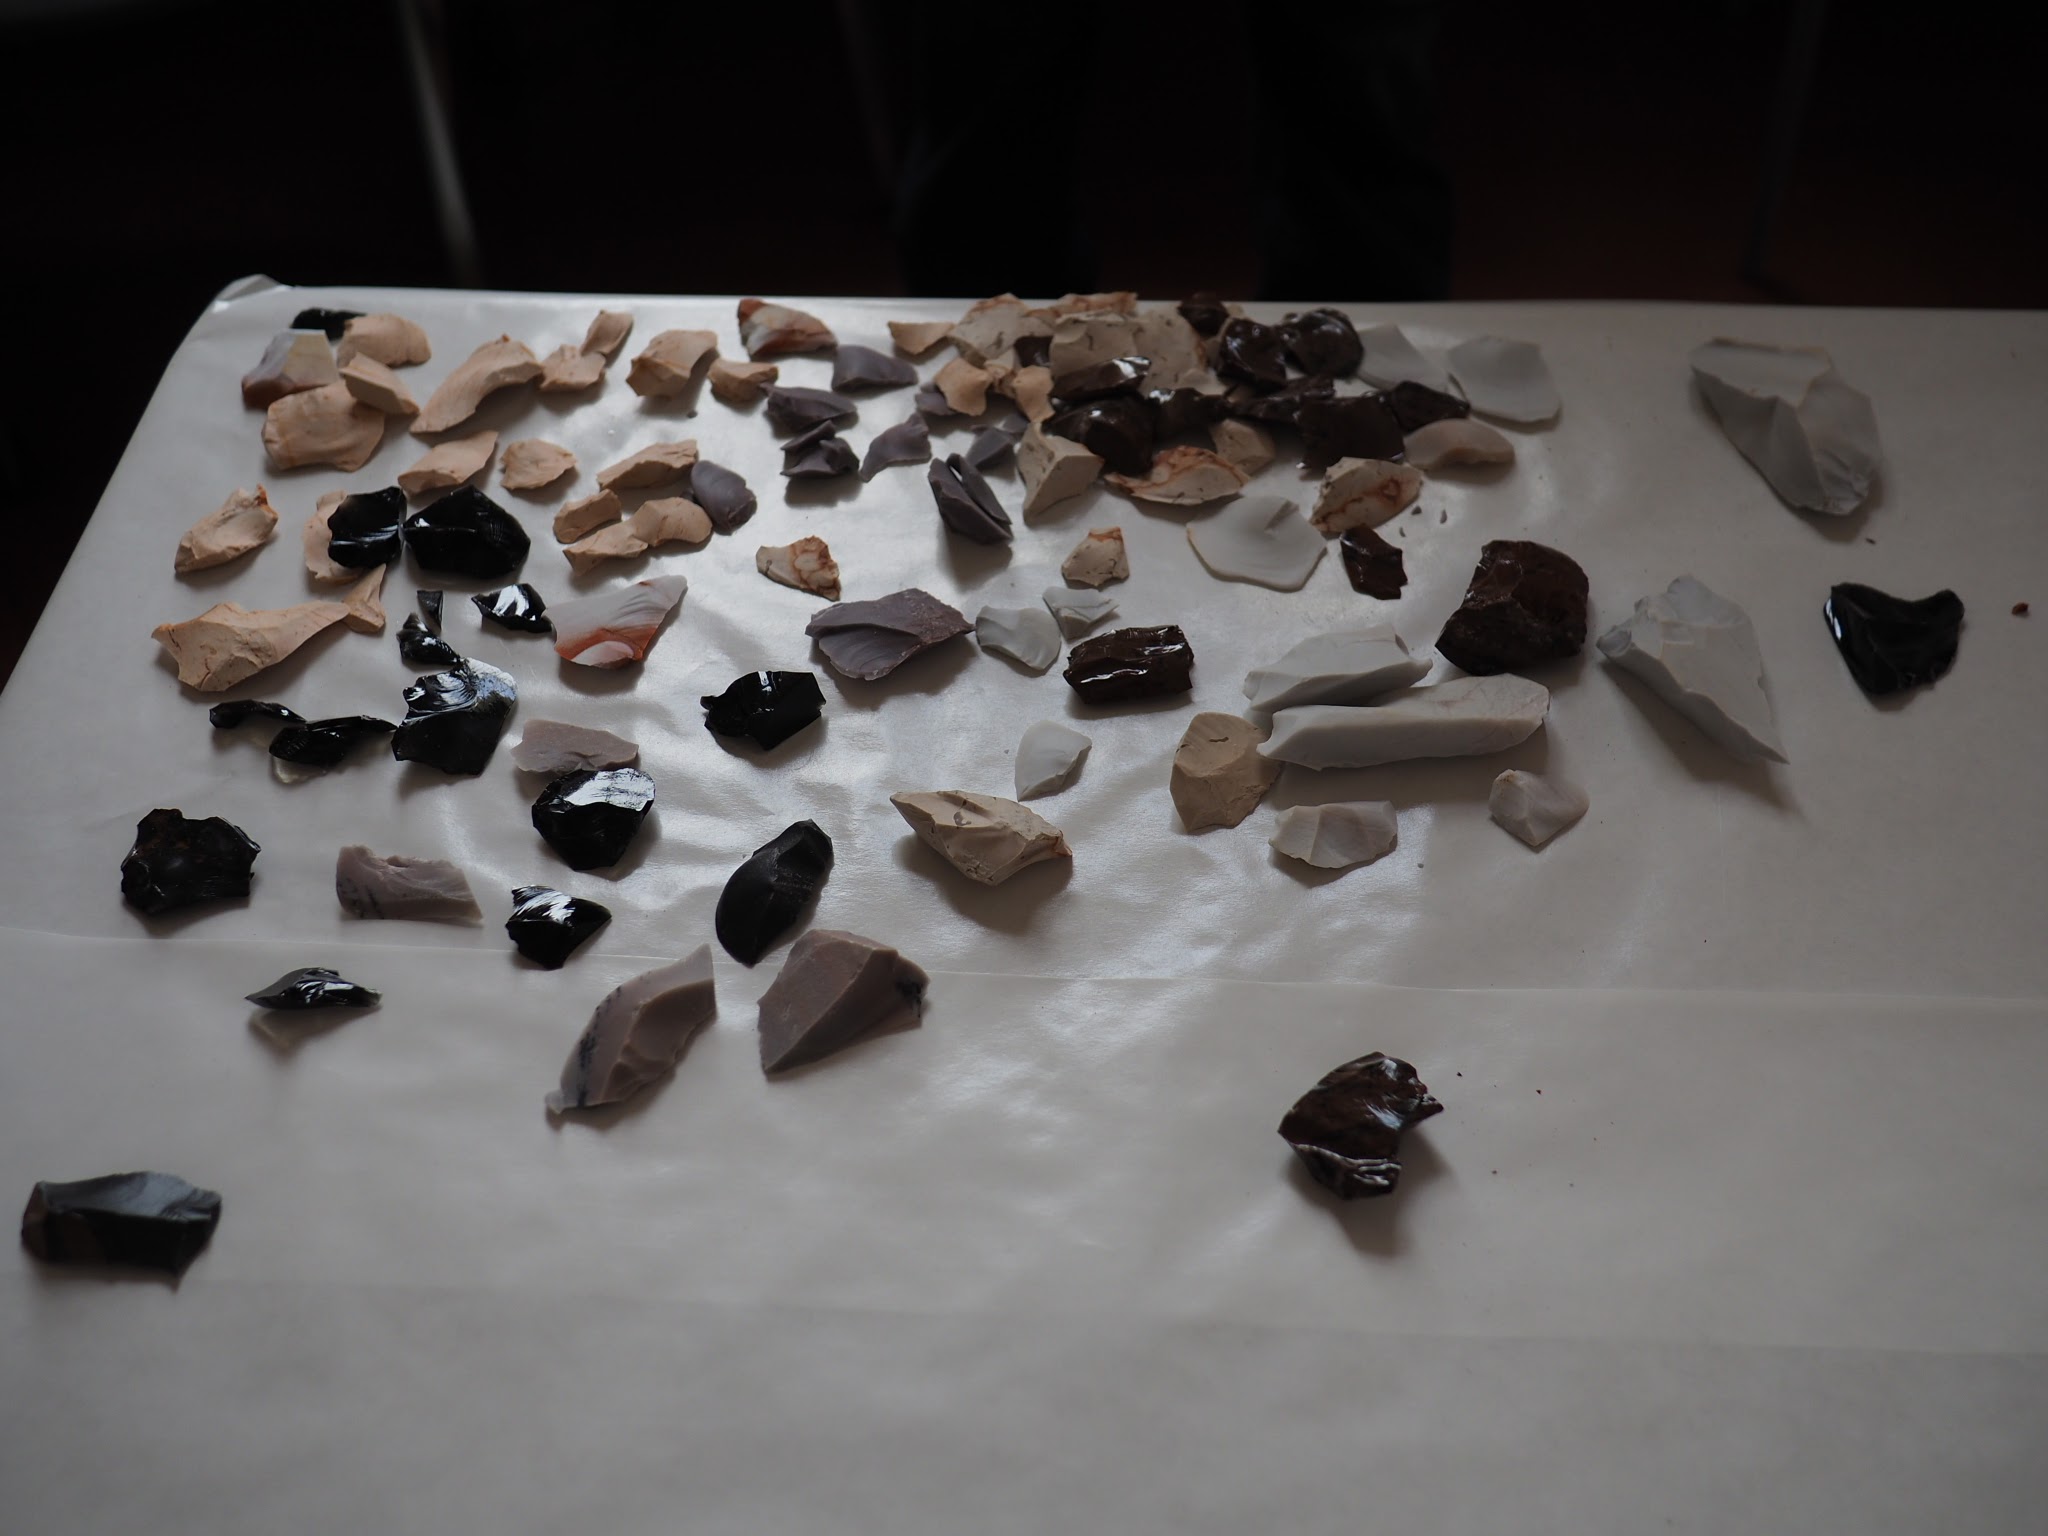 An initial sorting of potential stone tools.